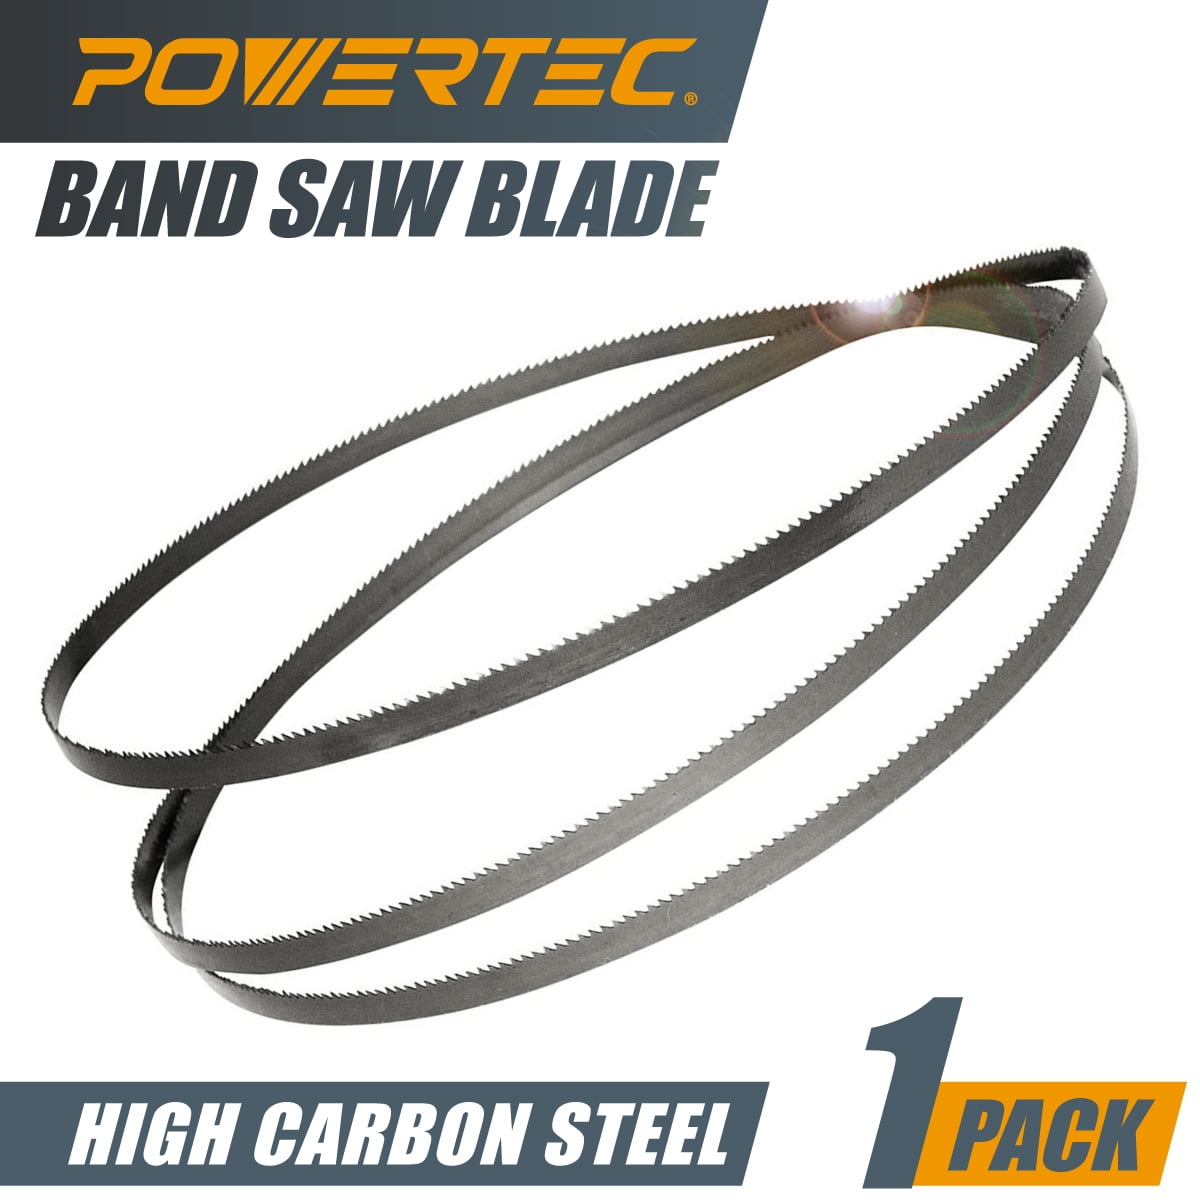 POWERTEC 56-1/8” x 3/8” x .014 x 6tpi Bandsaw Blade For Woodworking,  Plastic and Aluminum, 13161